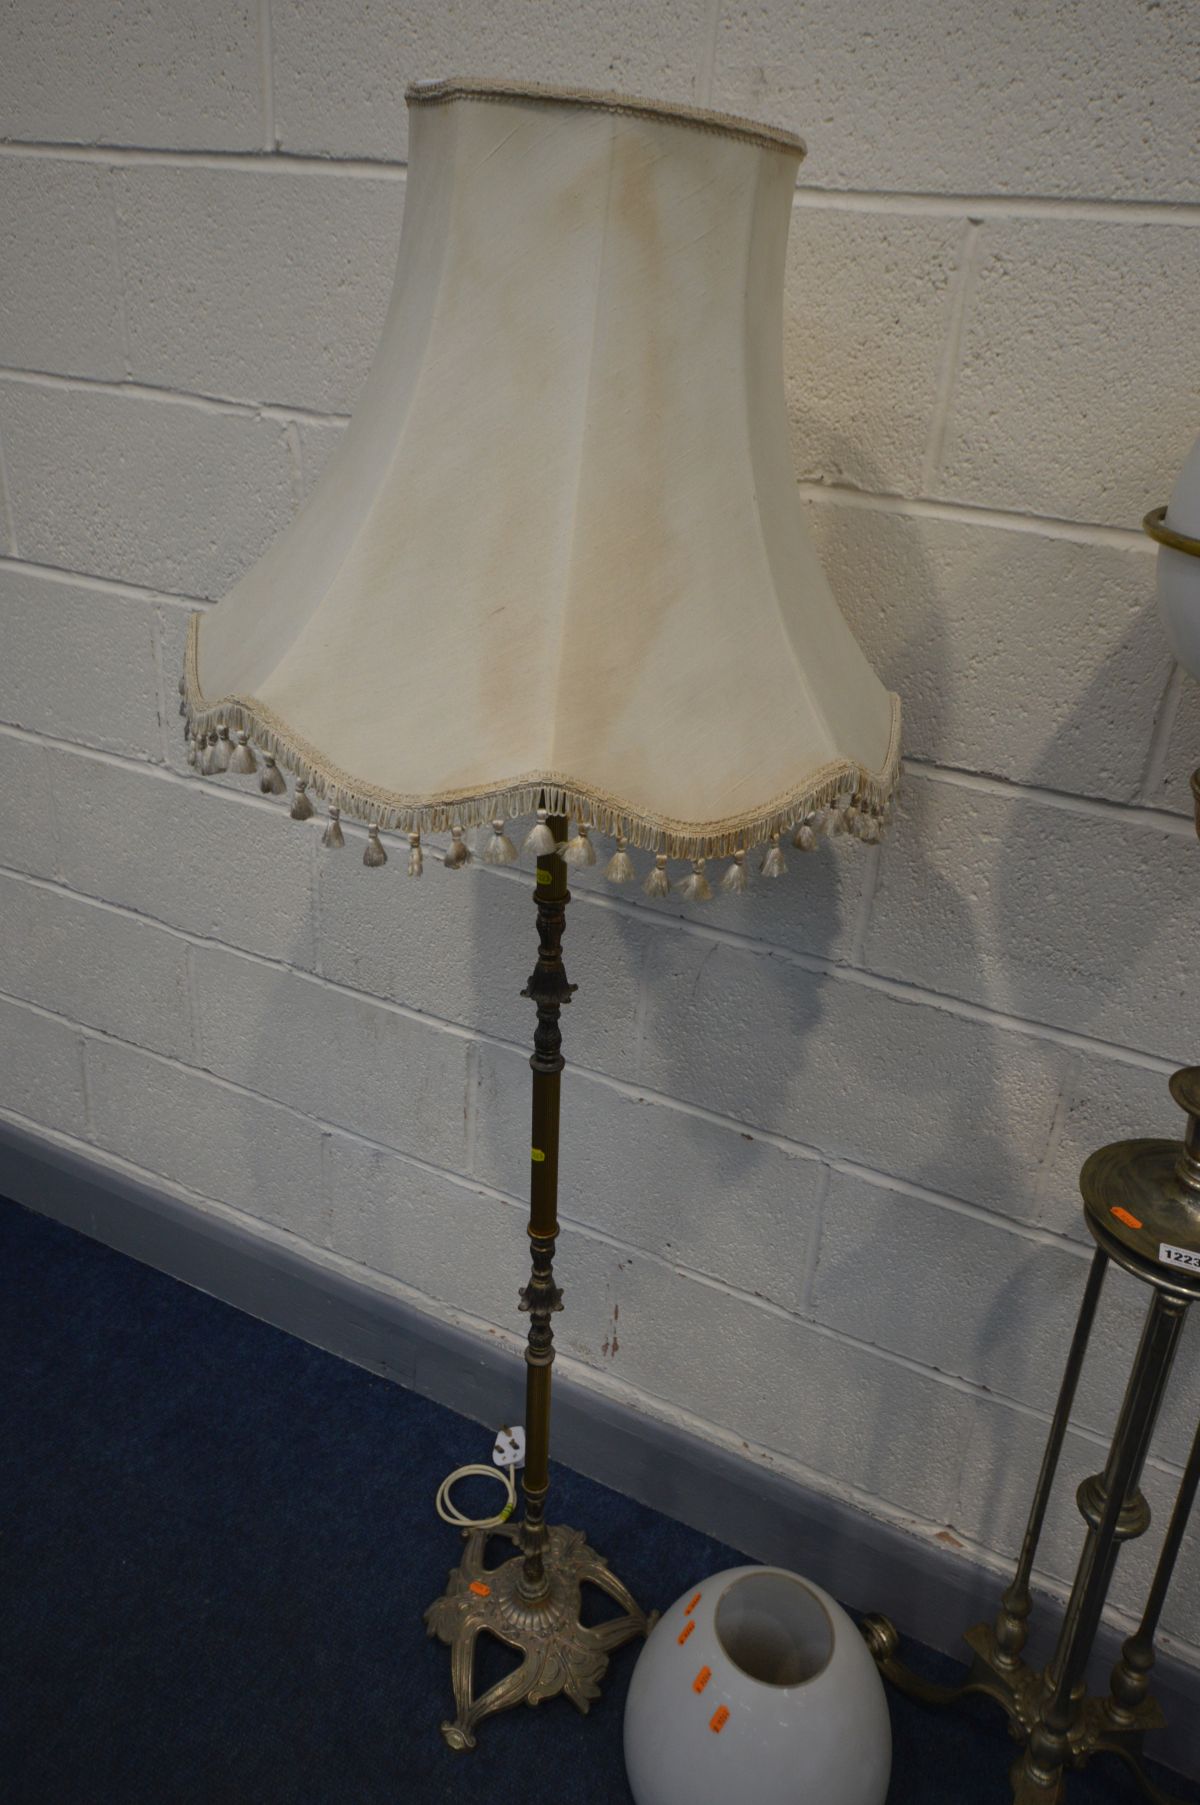 A TELESCOPIC OIL LAMP, white glass shade, brass reservoir, min height 133cm x max height 198cm, with - Image 4 of 4